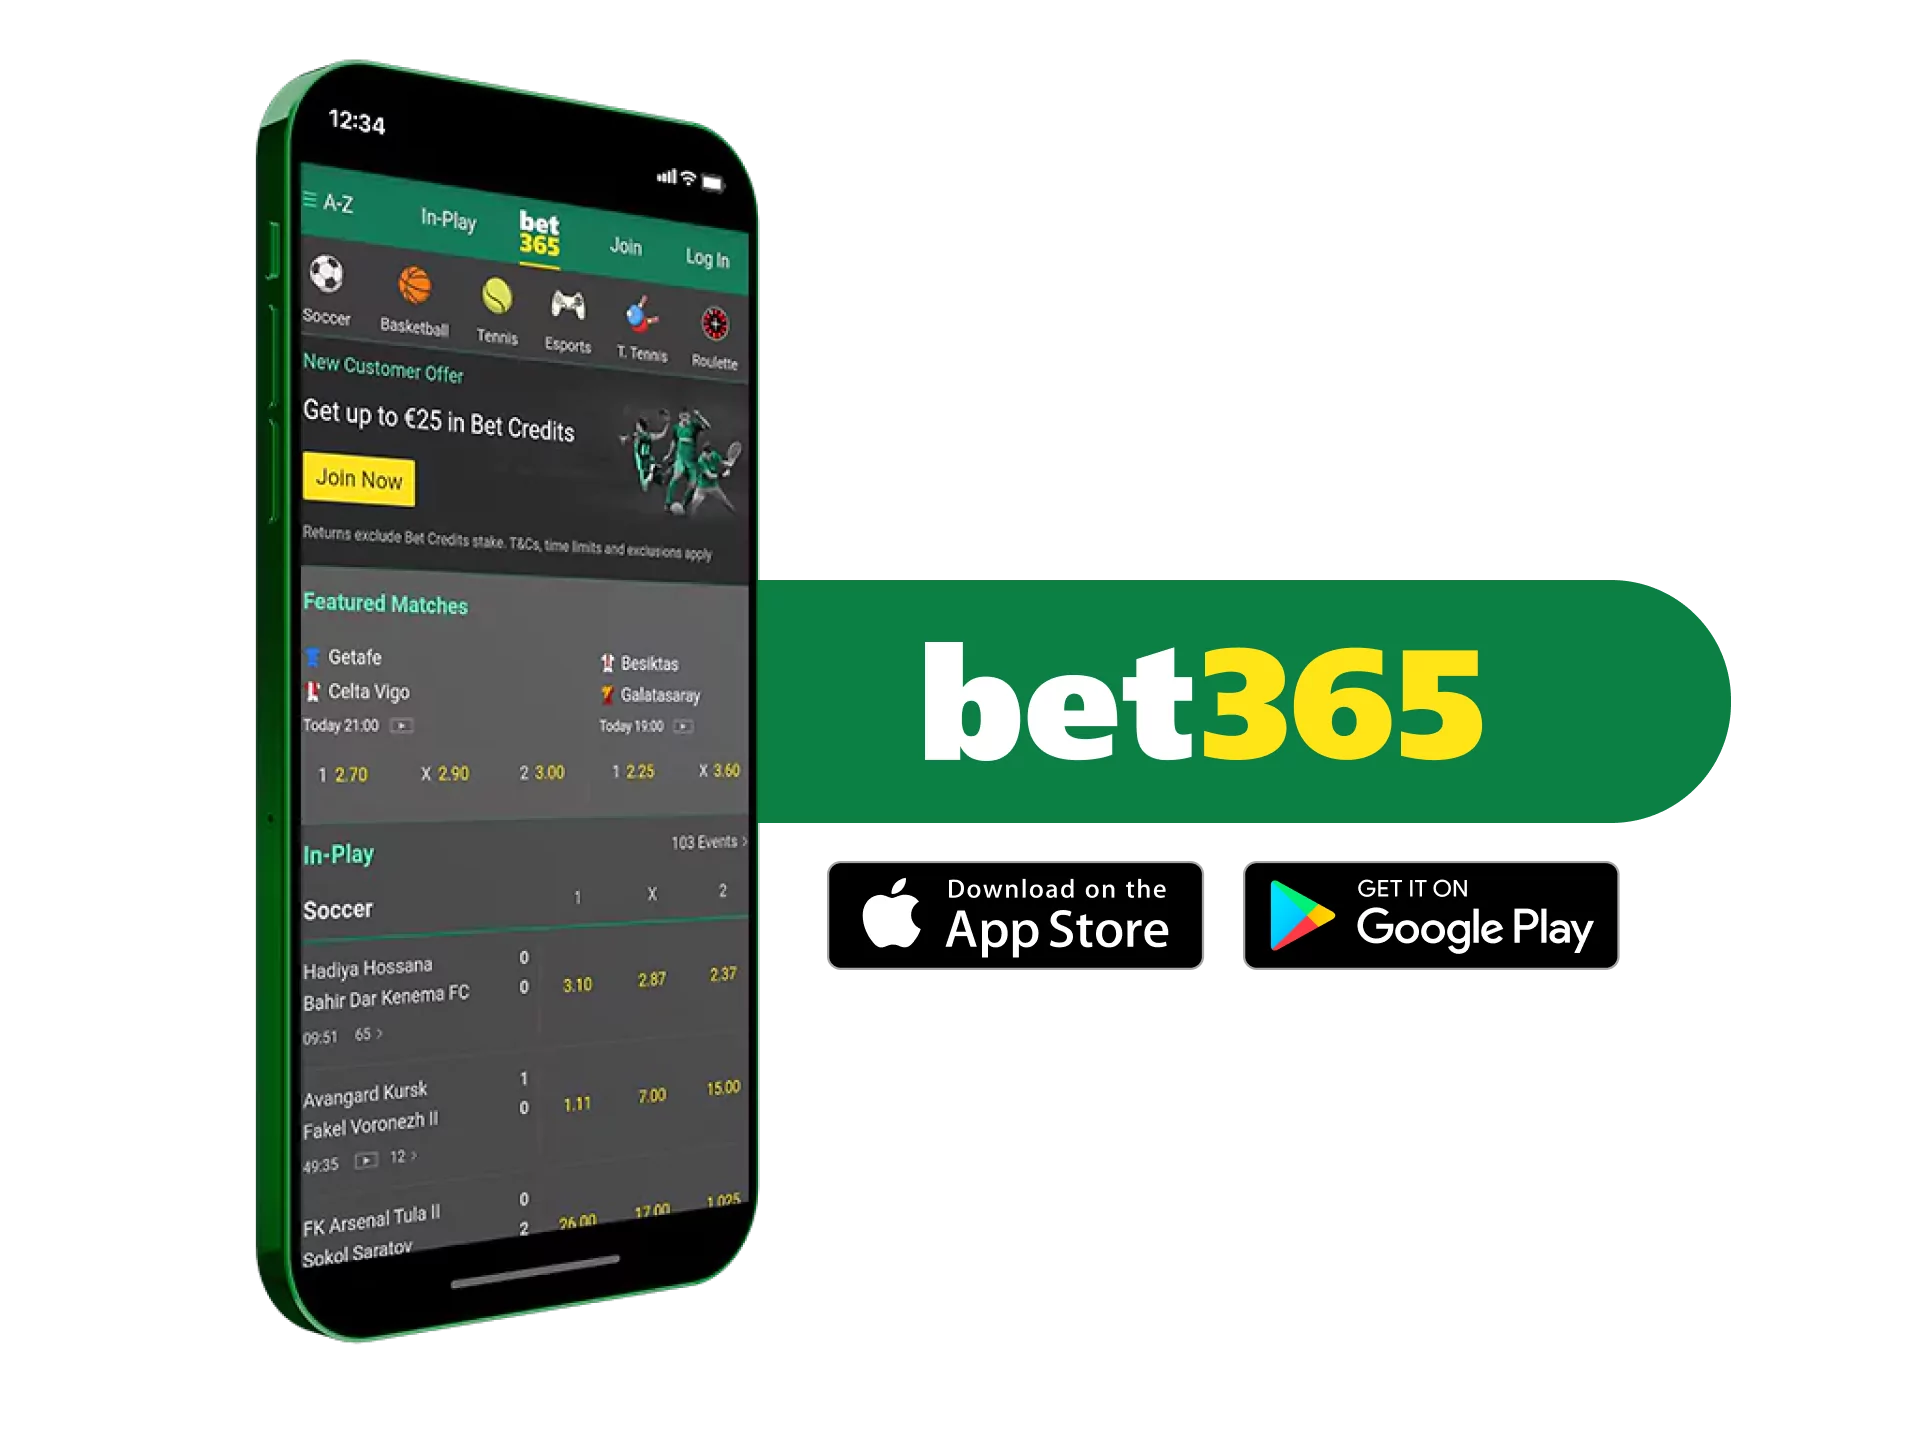 Bet365 betting company with access to an extensive repository of match statistics.